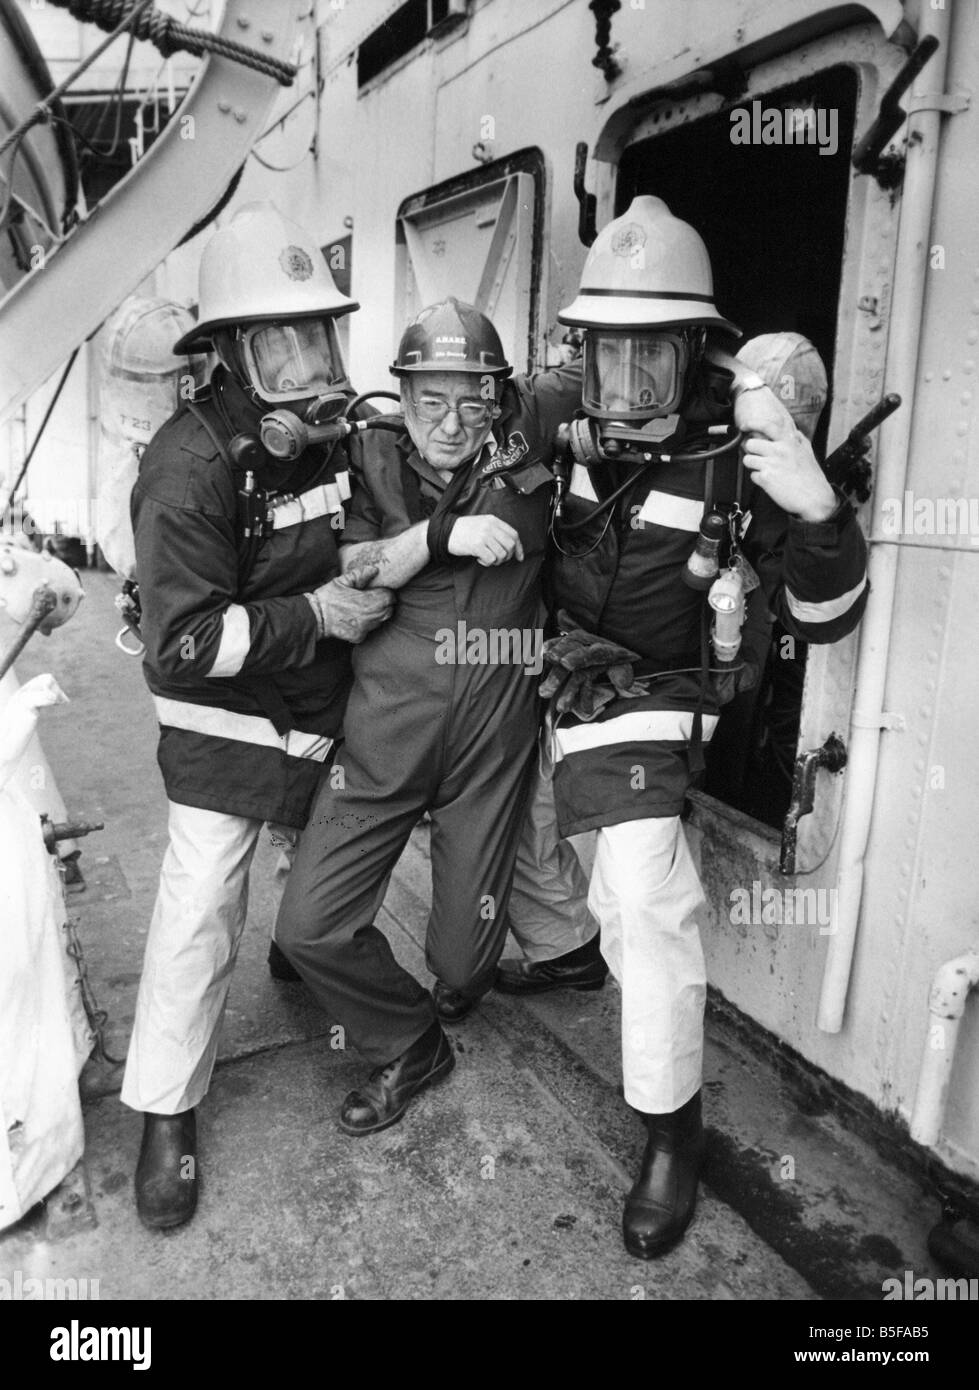 Firefighters taking part in a training exercise aboard former destroyer HMS Cavalier carry a victim from below decks Stock Photo